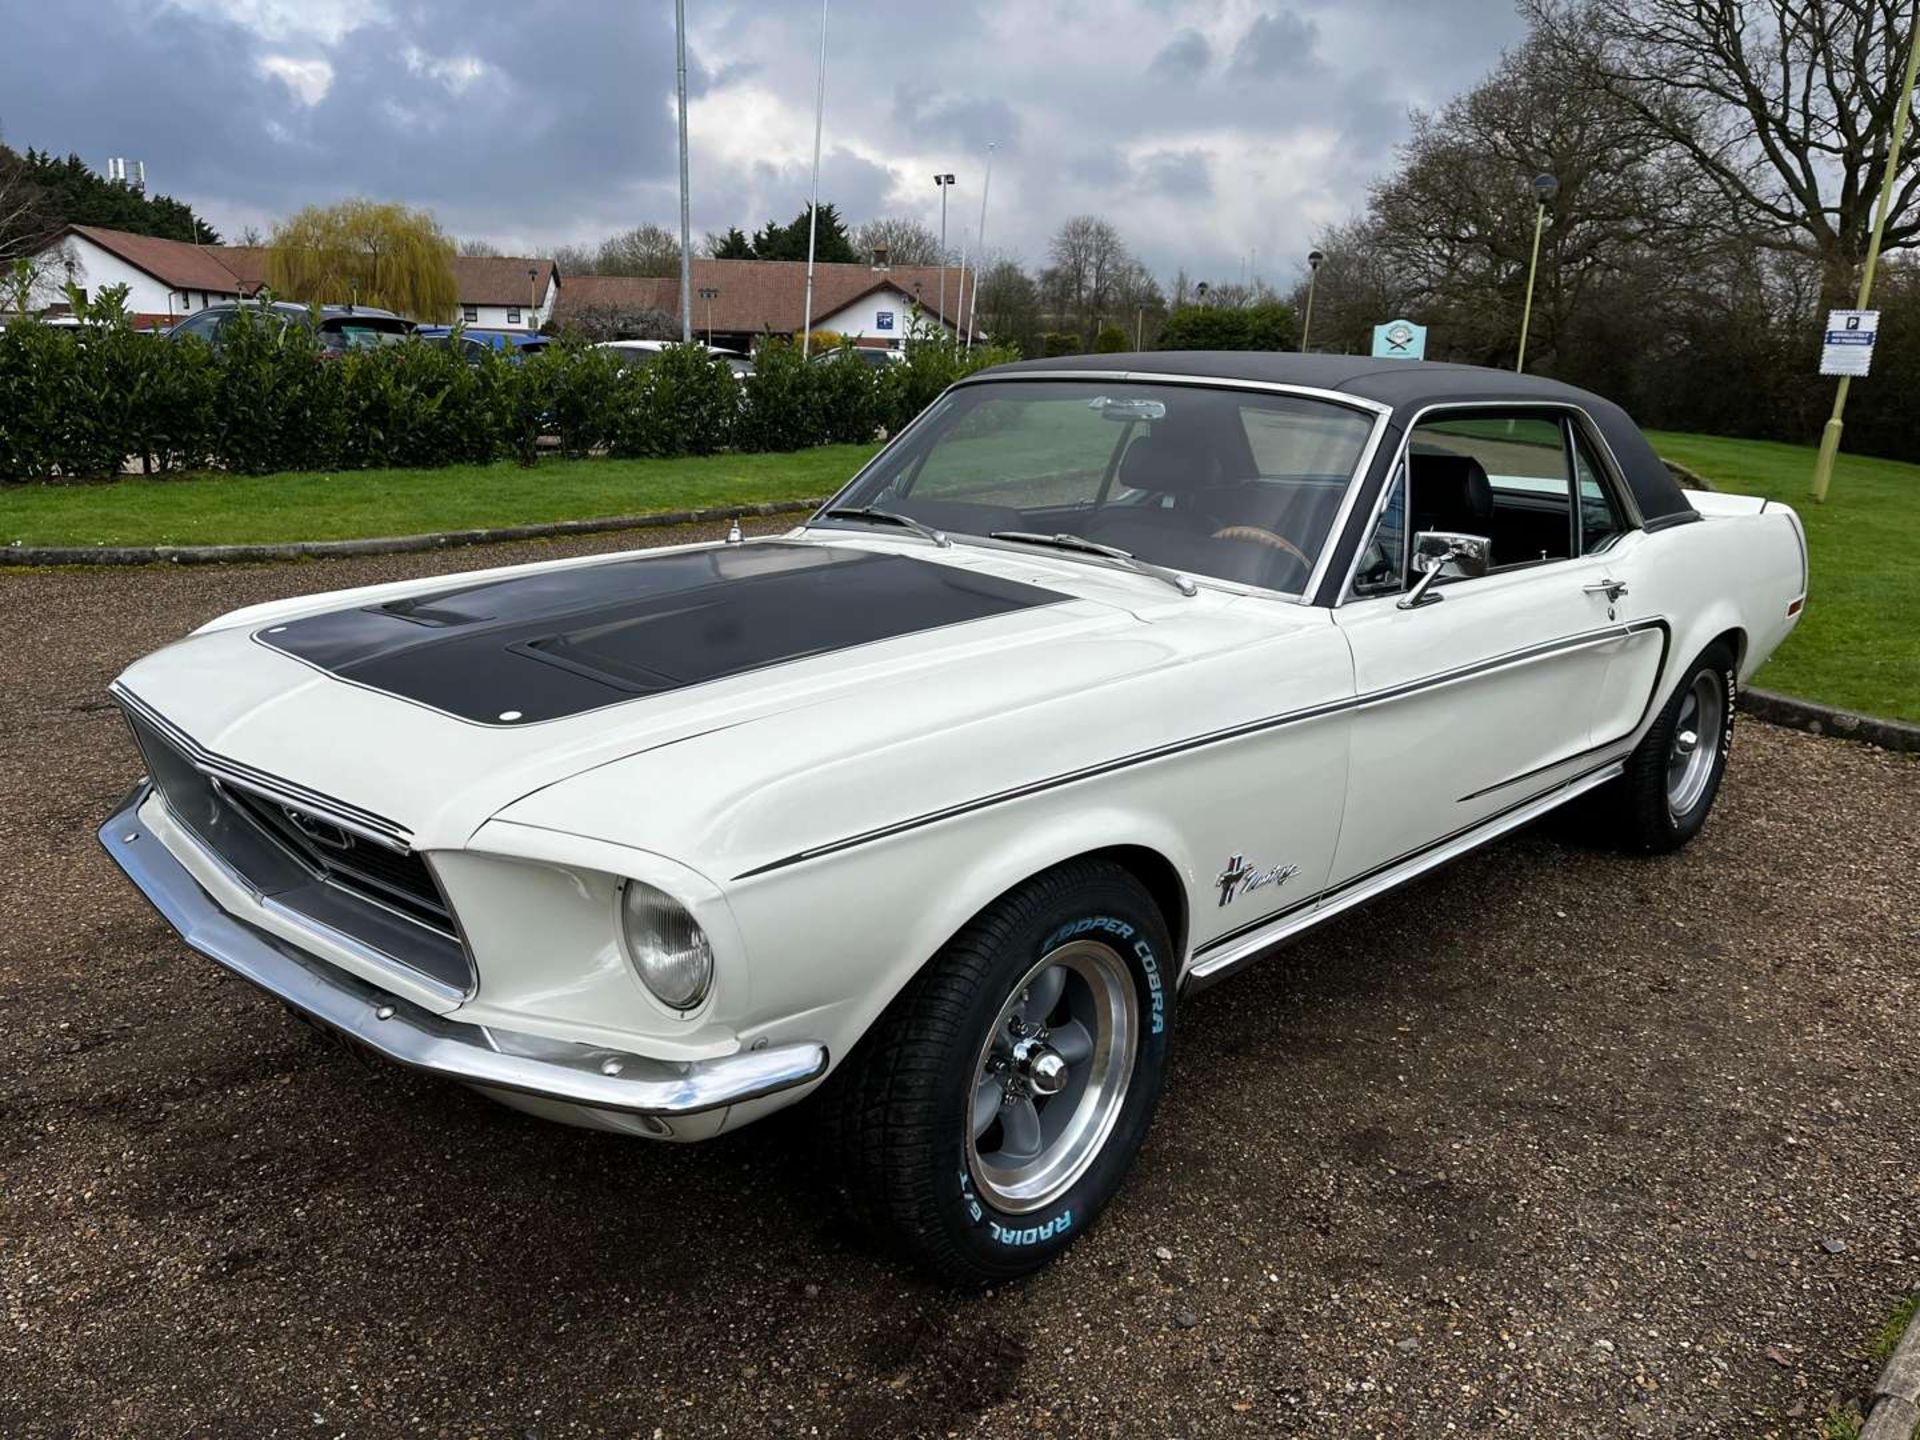 1968 FORD MUSTANG 5.0 V8 AUTO COUPE LHD - Image 3 of 29